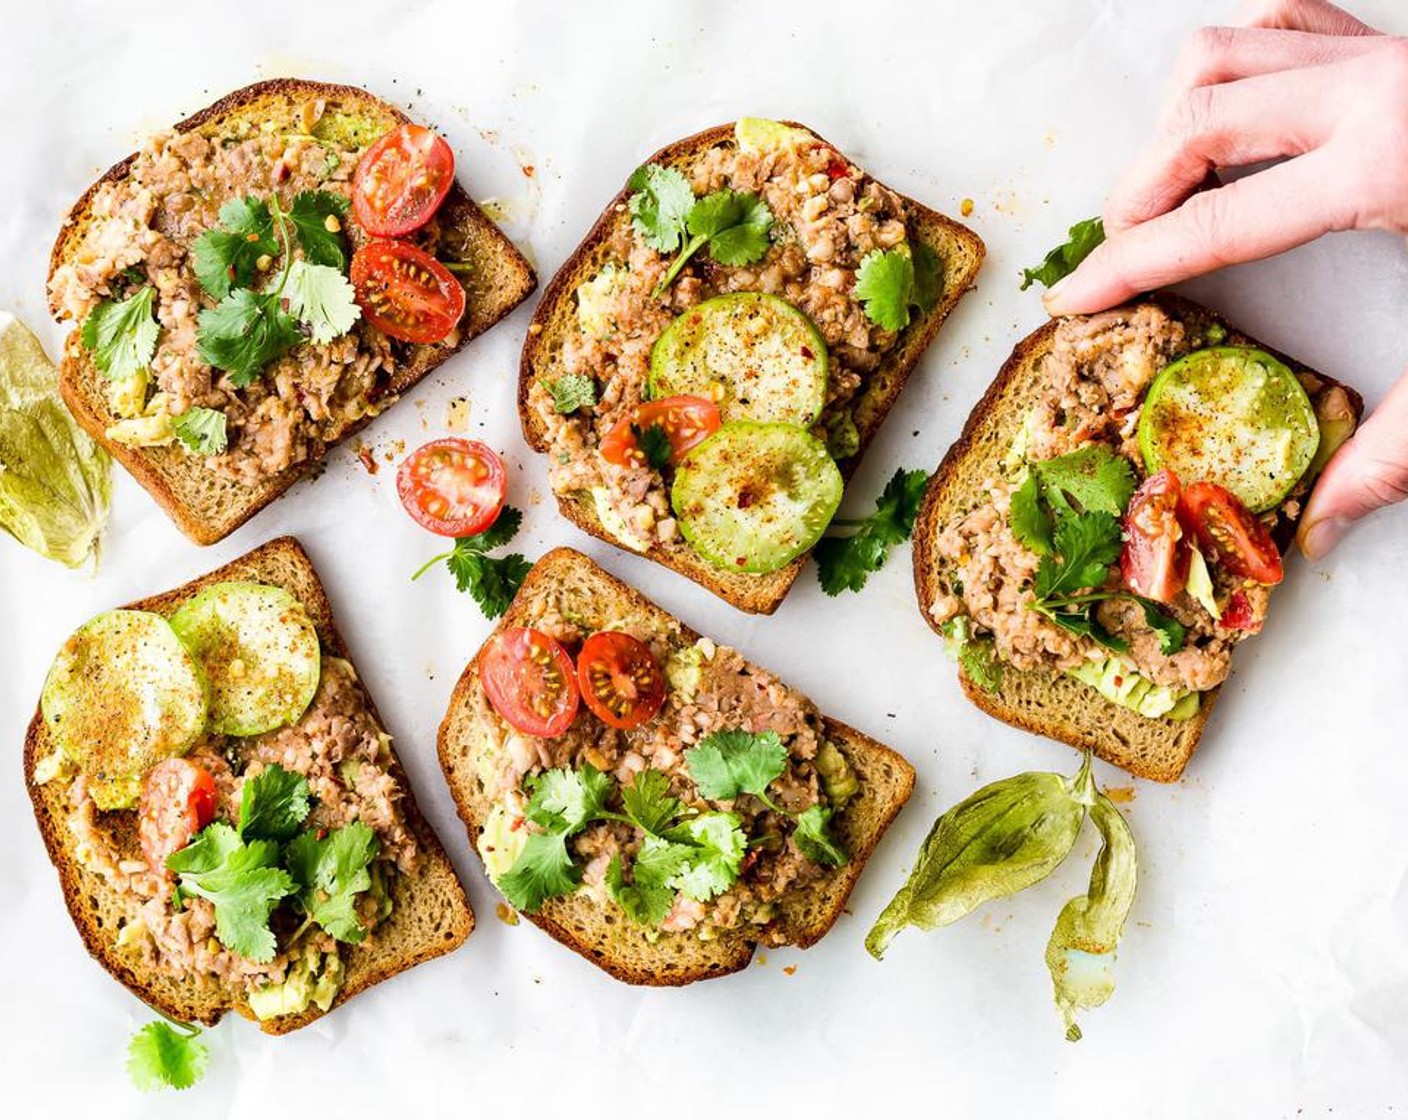 step 6 Garnish with Fresh Cilantro (to taste) and add any additional seasonings of choice like Chili Powder (to taste), Crushed Red Pepper Flakes (to taste), Onion Powder (to taste), or Mexican Seasoning (to taste). Drizzle Olive Oil (to taste) on top of each avocado toast.